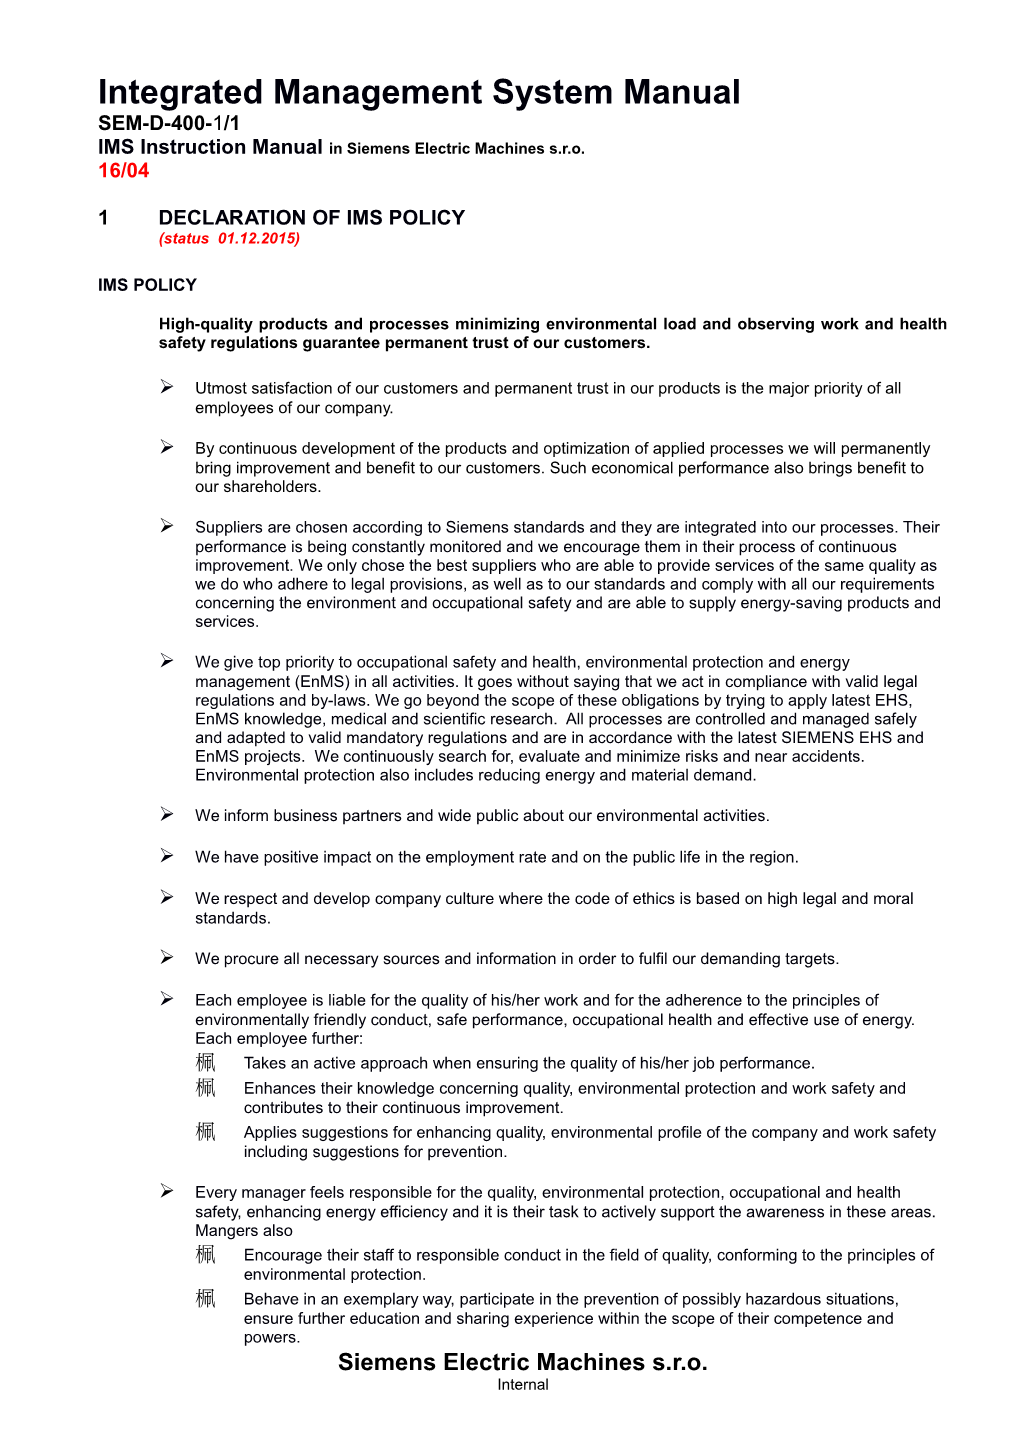 1Declaration of IMS Policy